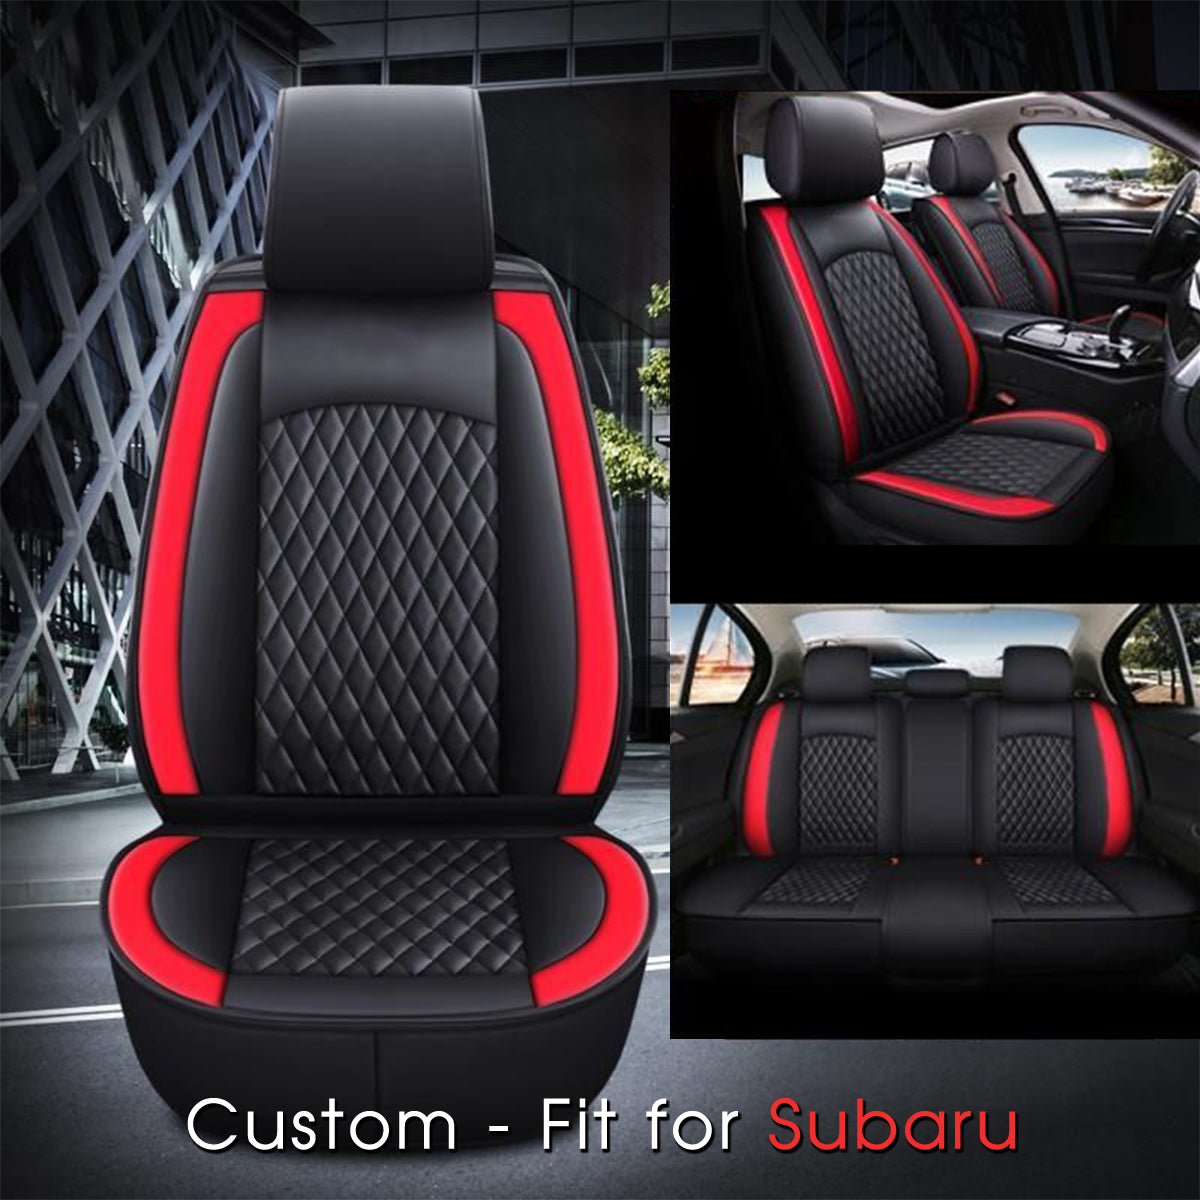 2 Car Seat Covers Full Set, Custom-Fit For Car, Waterproof Leather Front Rear Seat Automotive Protection Cushions, Car Accessories DLTS211